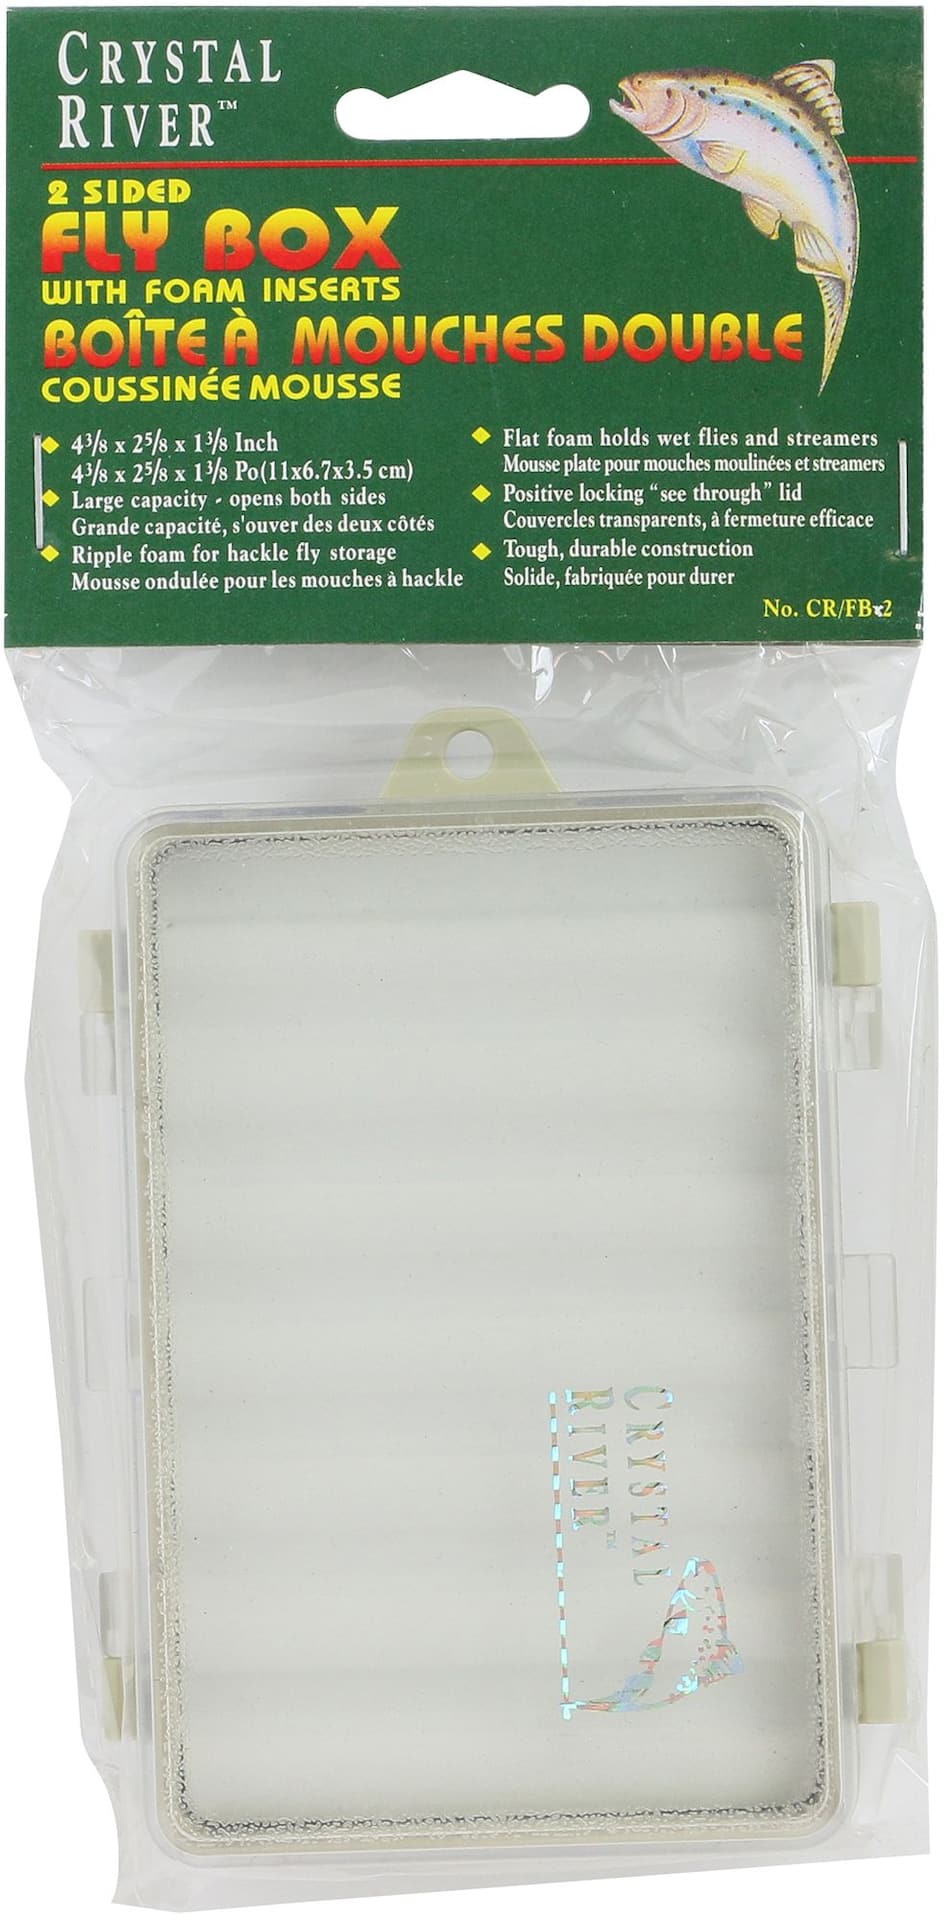 https://media-www.canadiantire.ca/product/playing/fishing/fishing-accessories/0788414/crystal-river-foam-fly-box-size-small-a8102f1d-f8ca-46fb-9adb-b4e40918bd8f-jpgrendition.jpg